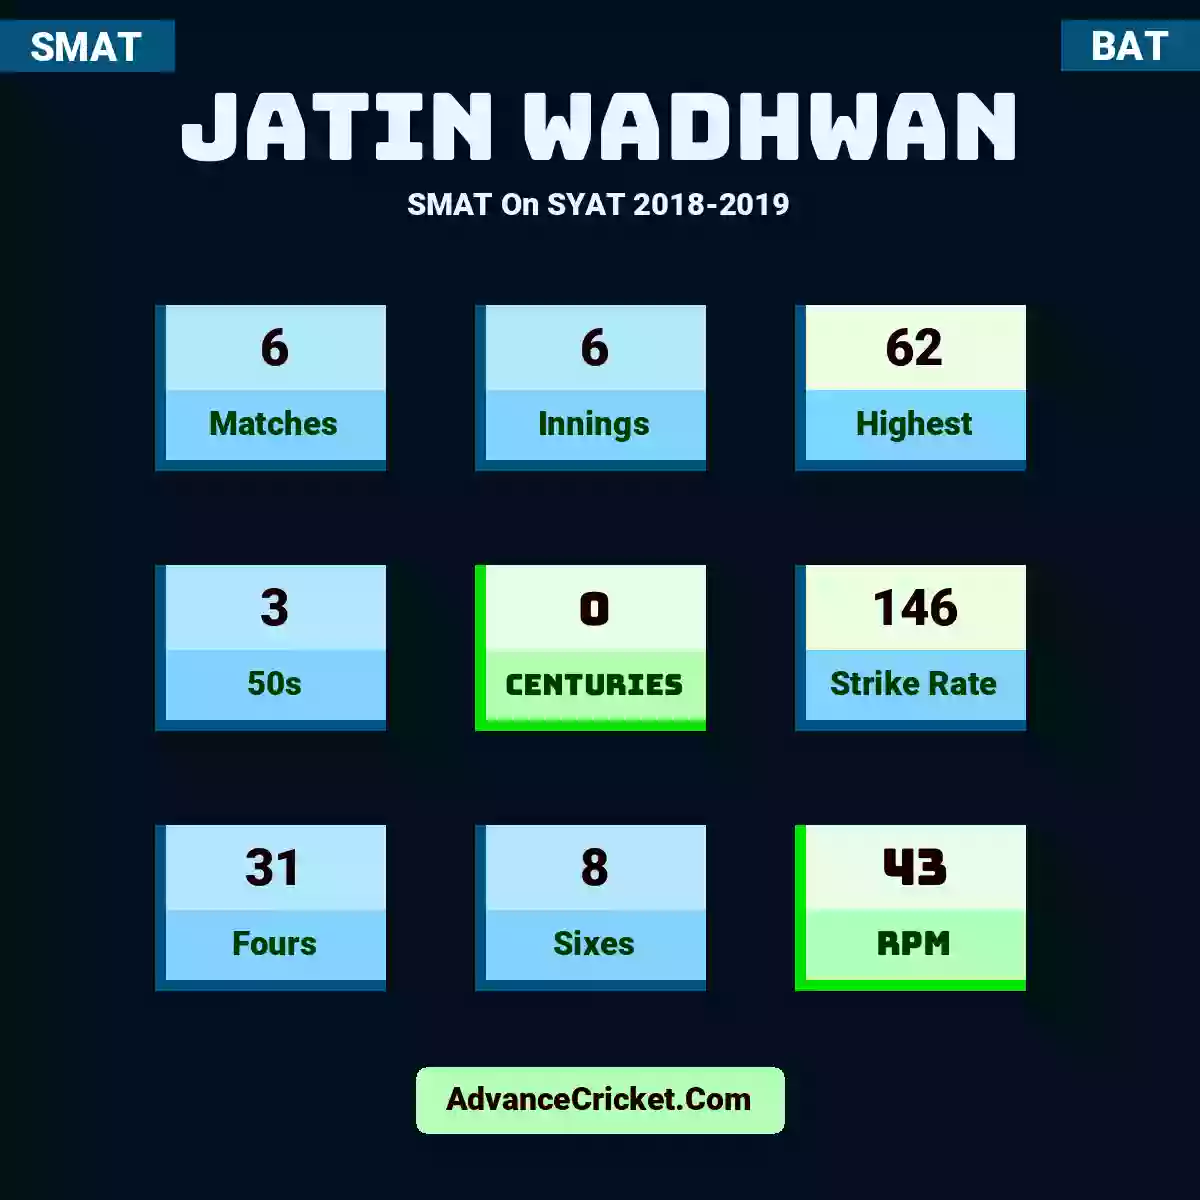 Jatin Wadhwan SMAT  On SYAT 2018-2019, Jatin Wadhwan played 6 matches, scored 62 runs as highest, 3 half-centuries, and 0 centuries, with a strike rate of 146. J.Wadhwan hit 31 fours and 8 sixes, with an RPM of 43.